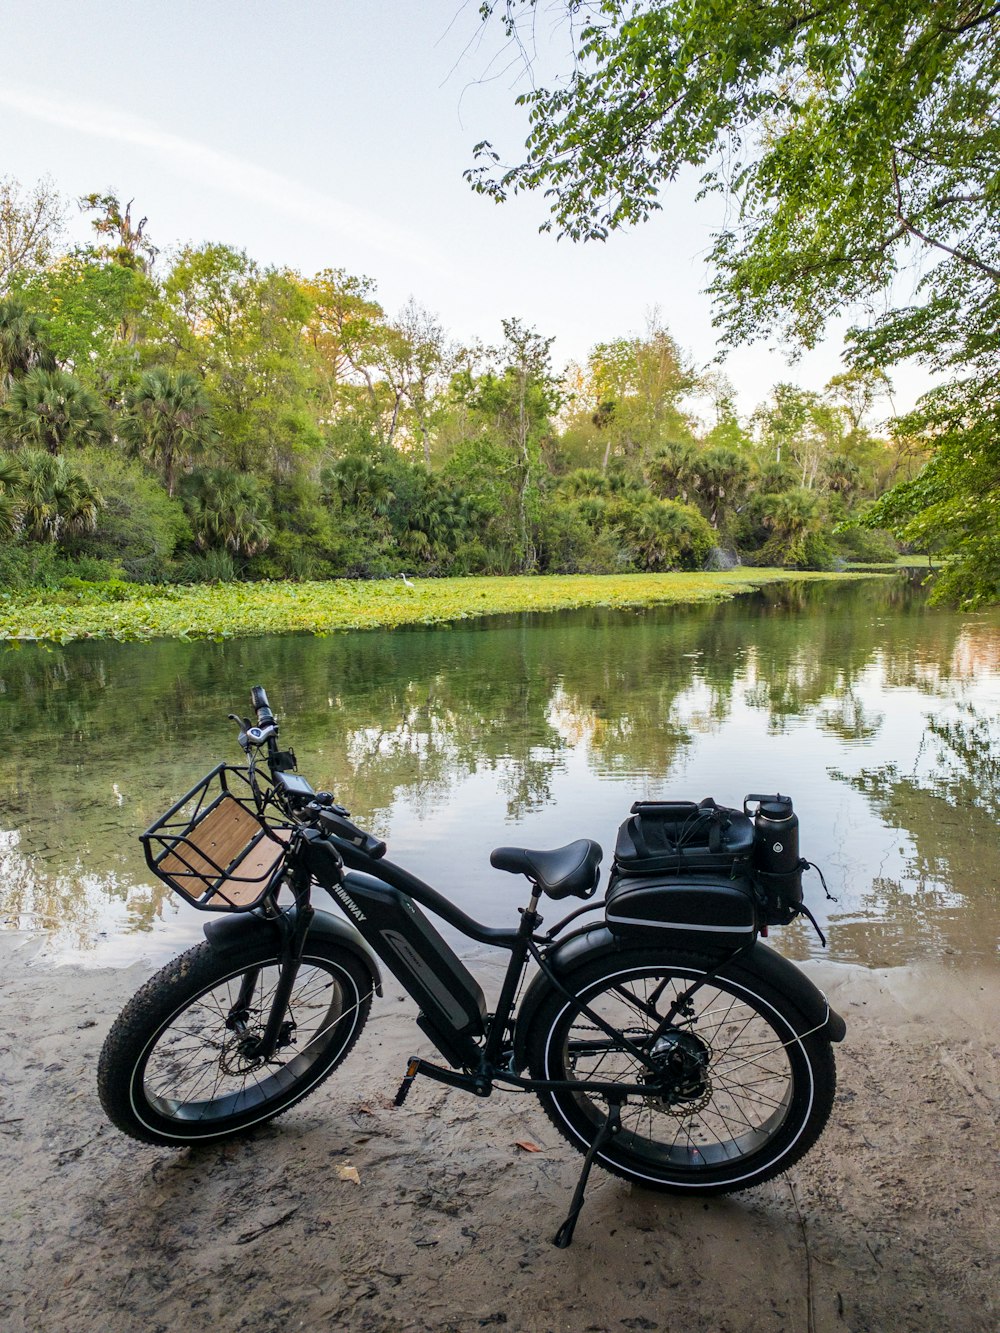 black motorcycle parked beside river during daytime